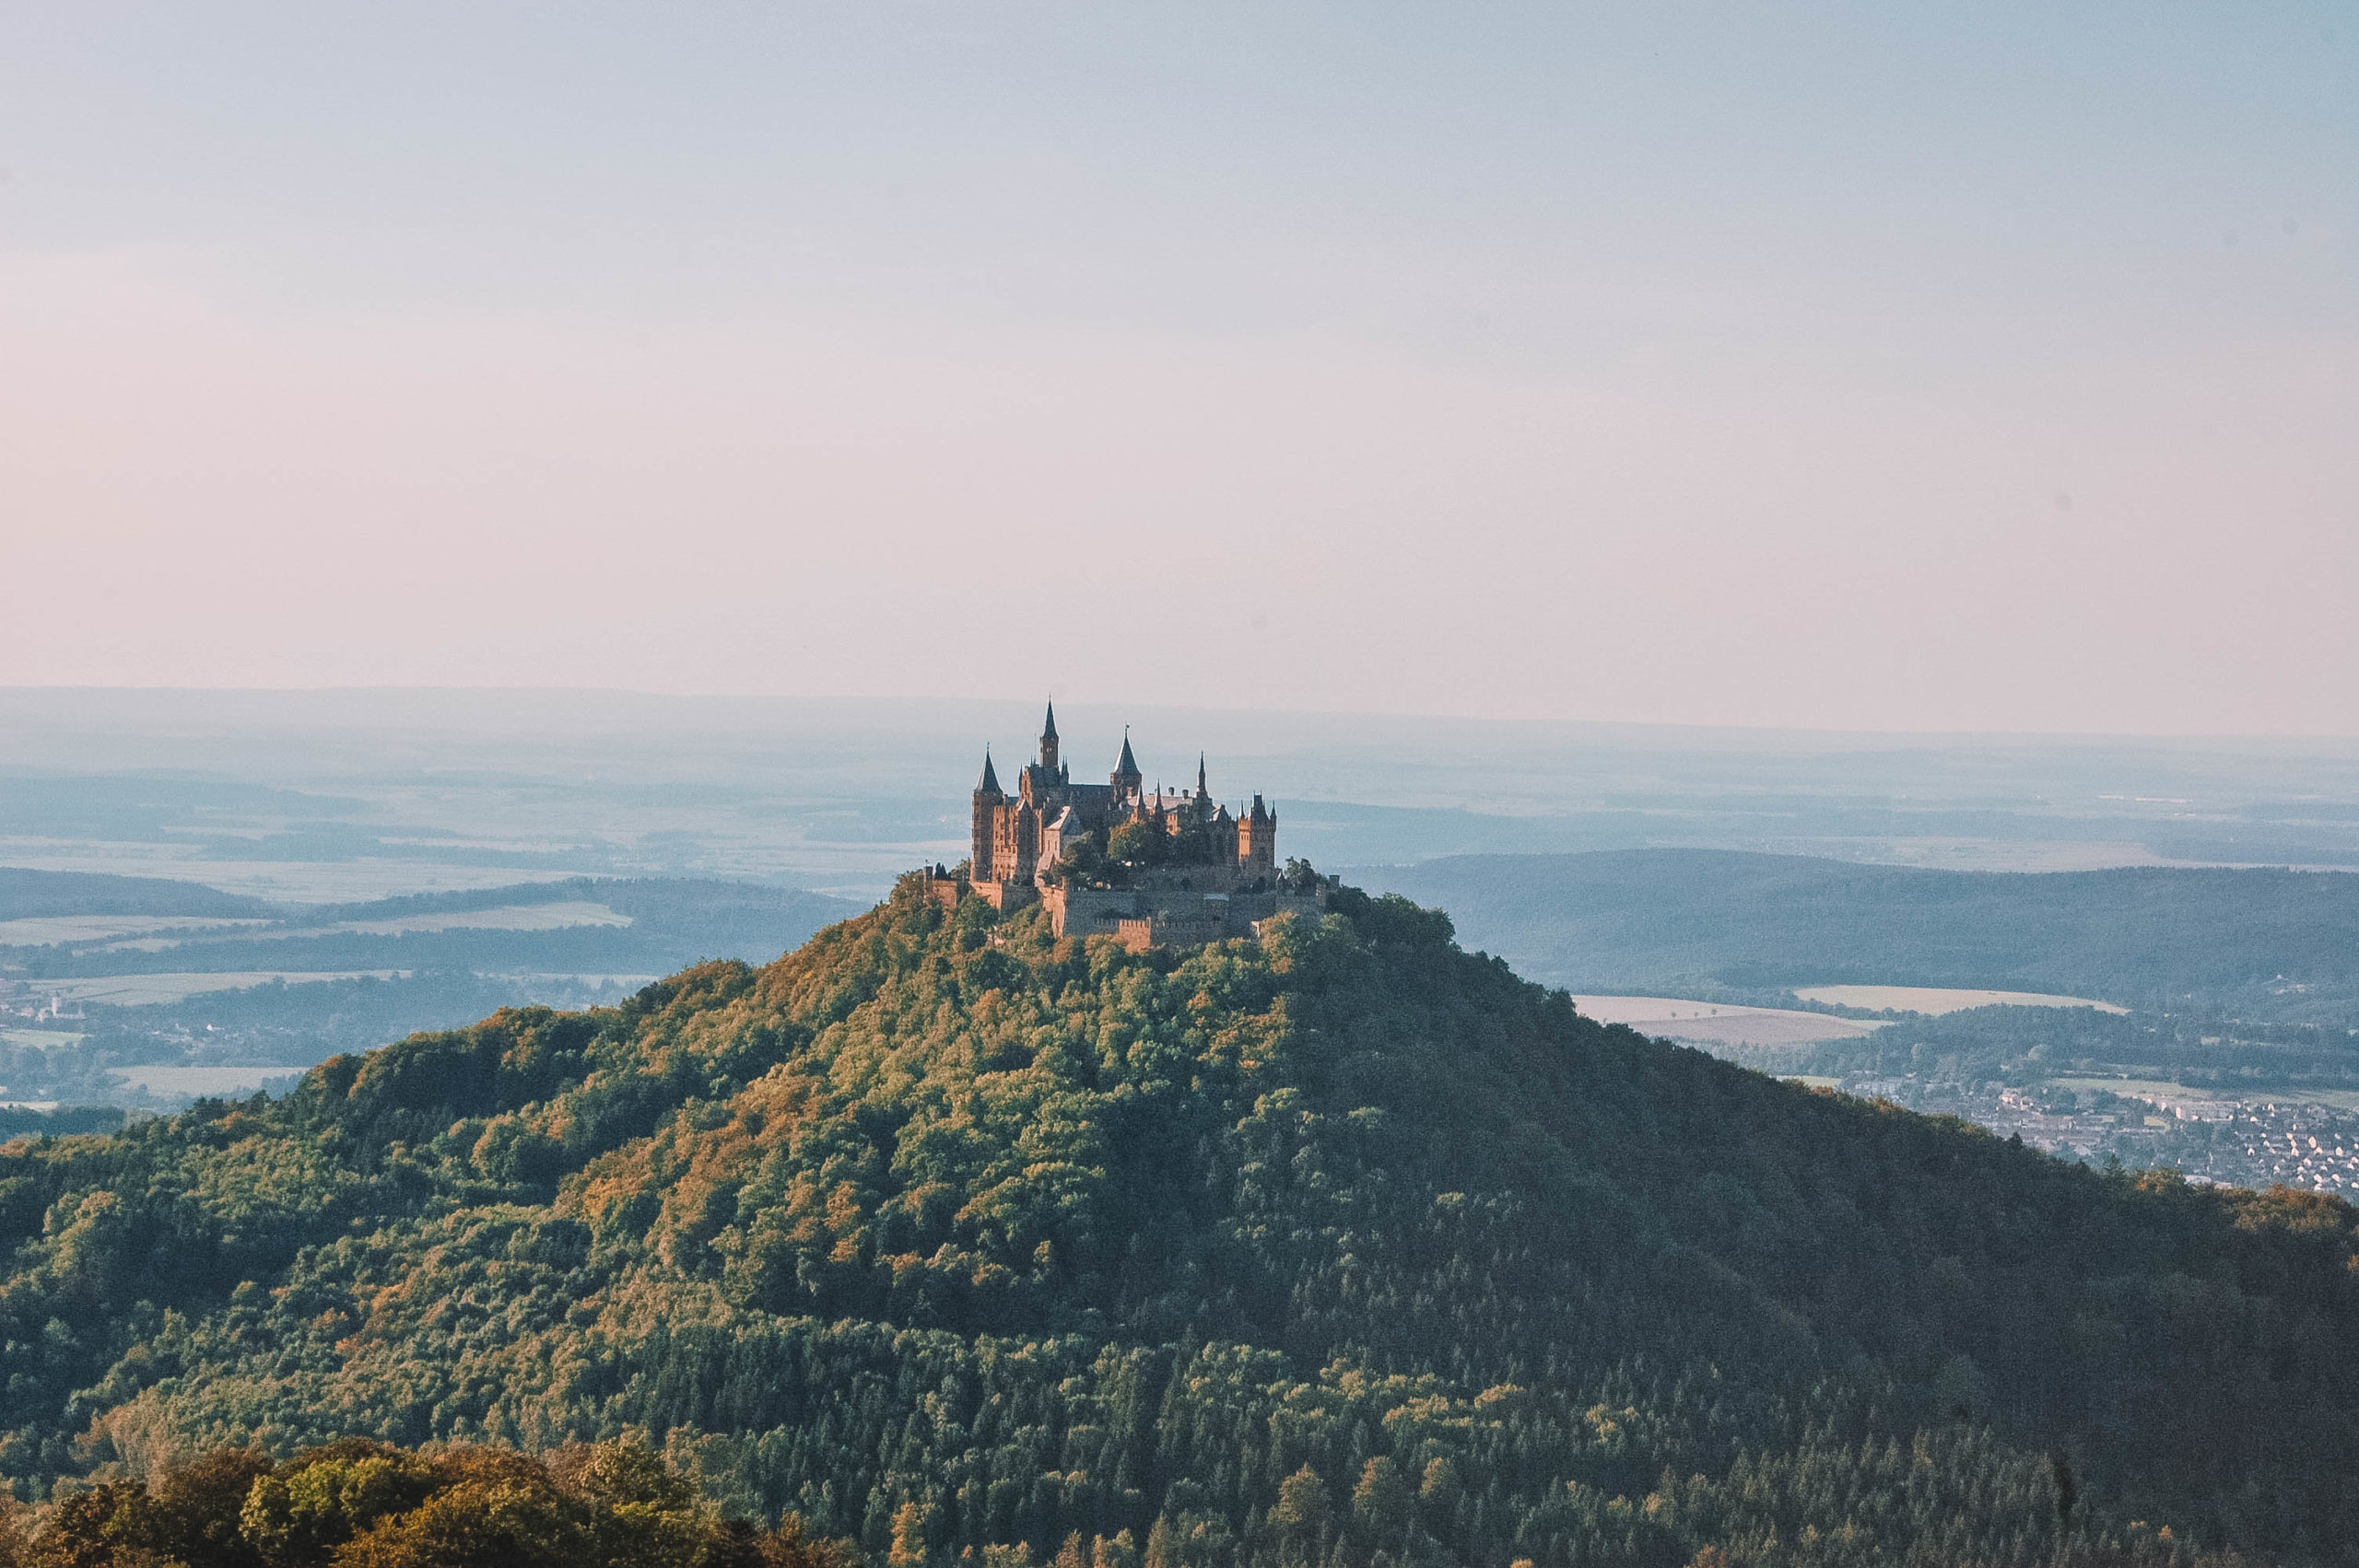 Hohenzollern Castle on the top of Mount Hohenzollern